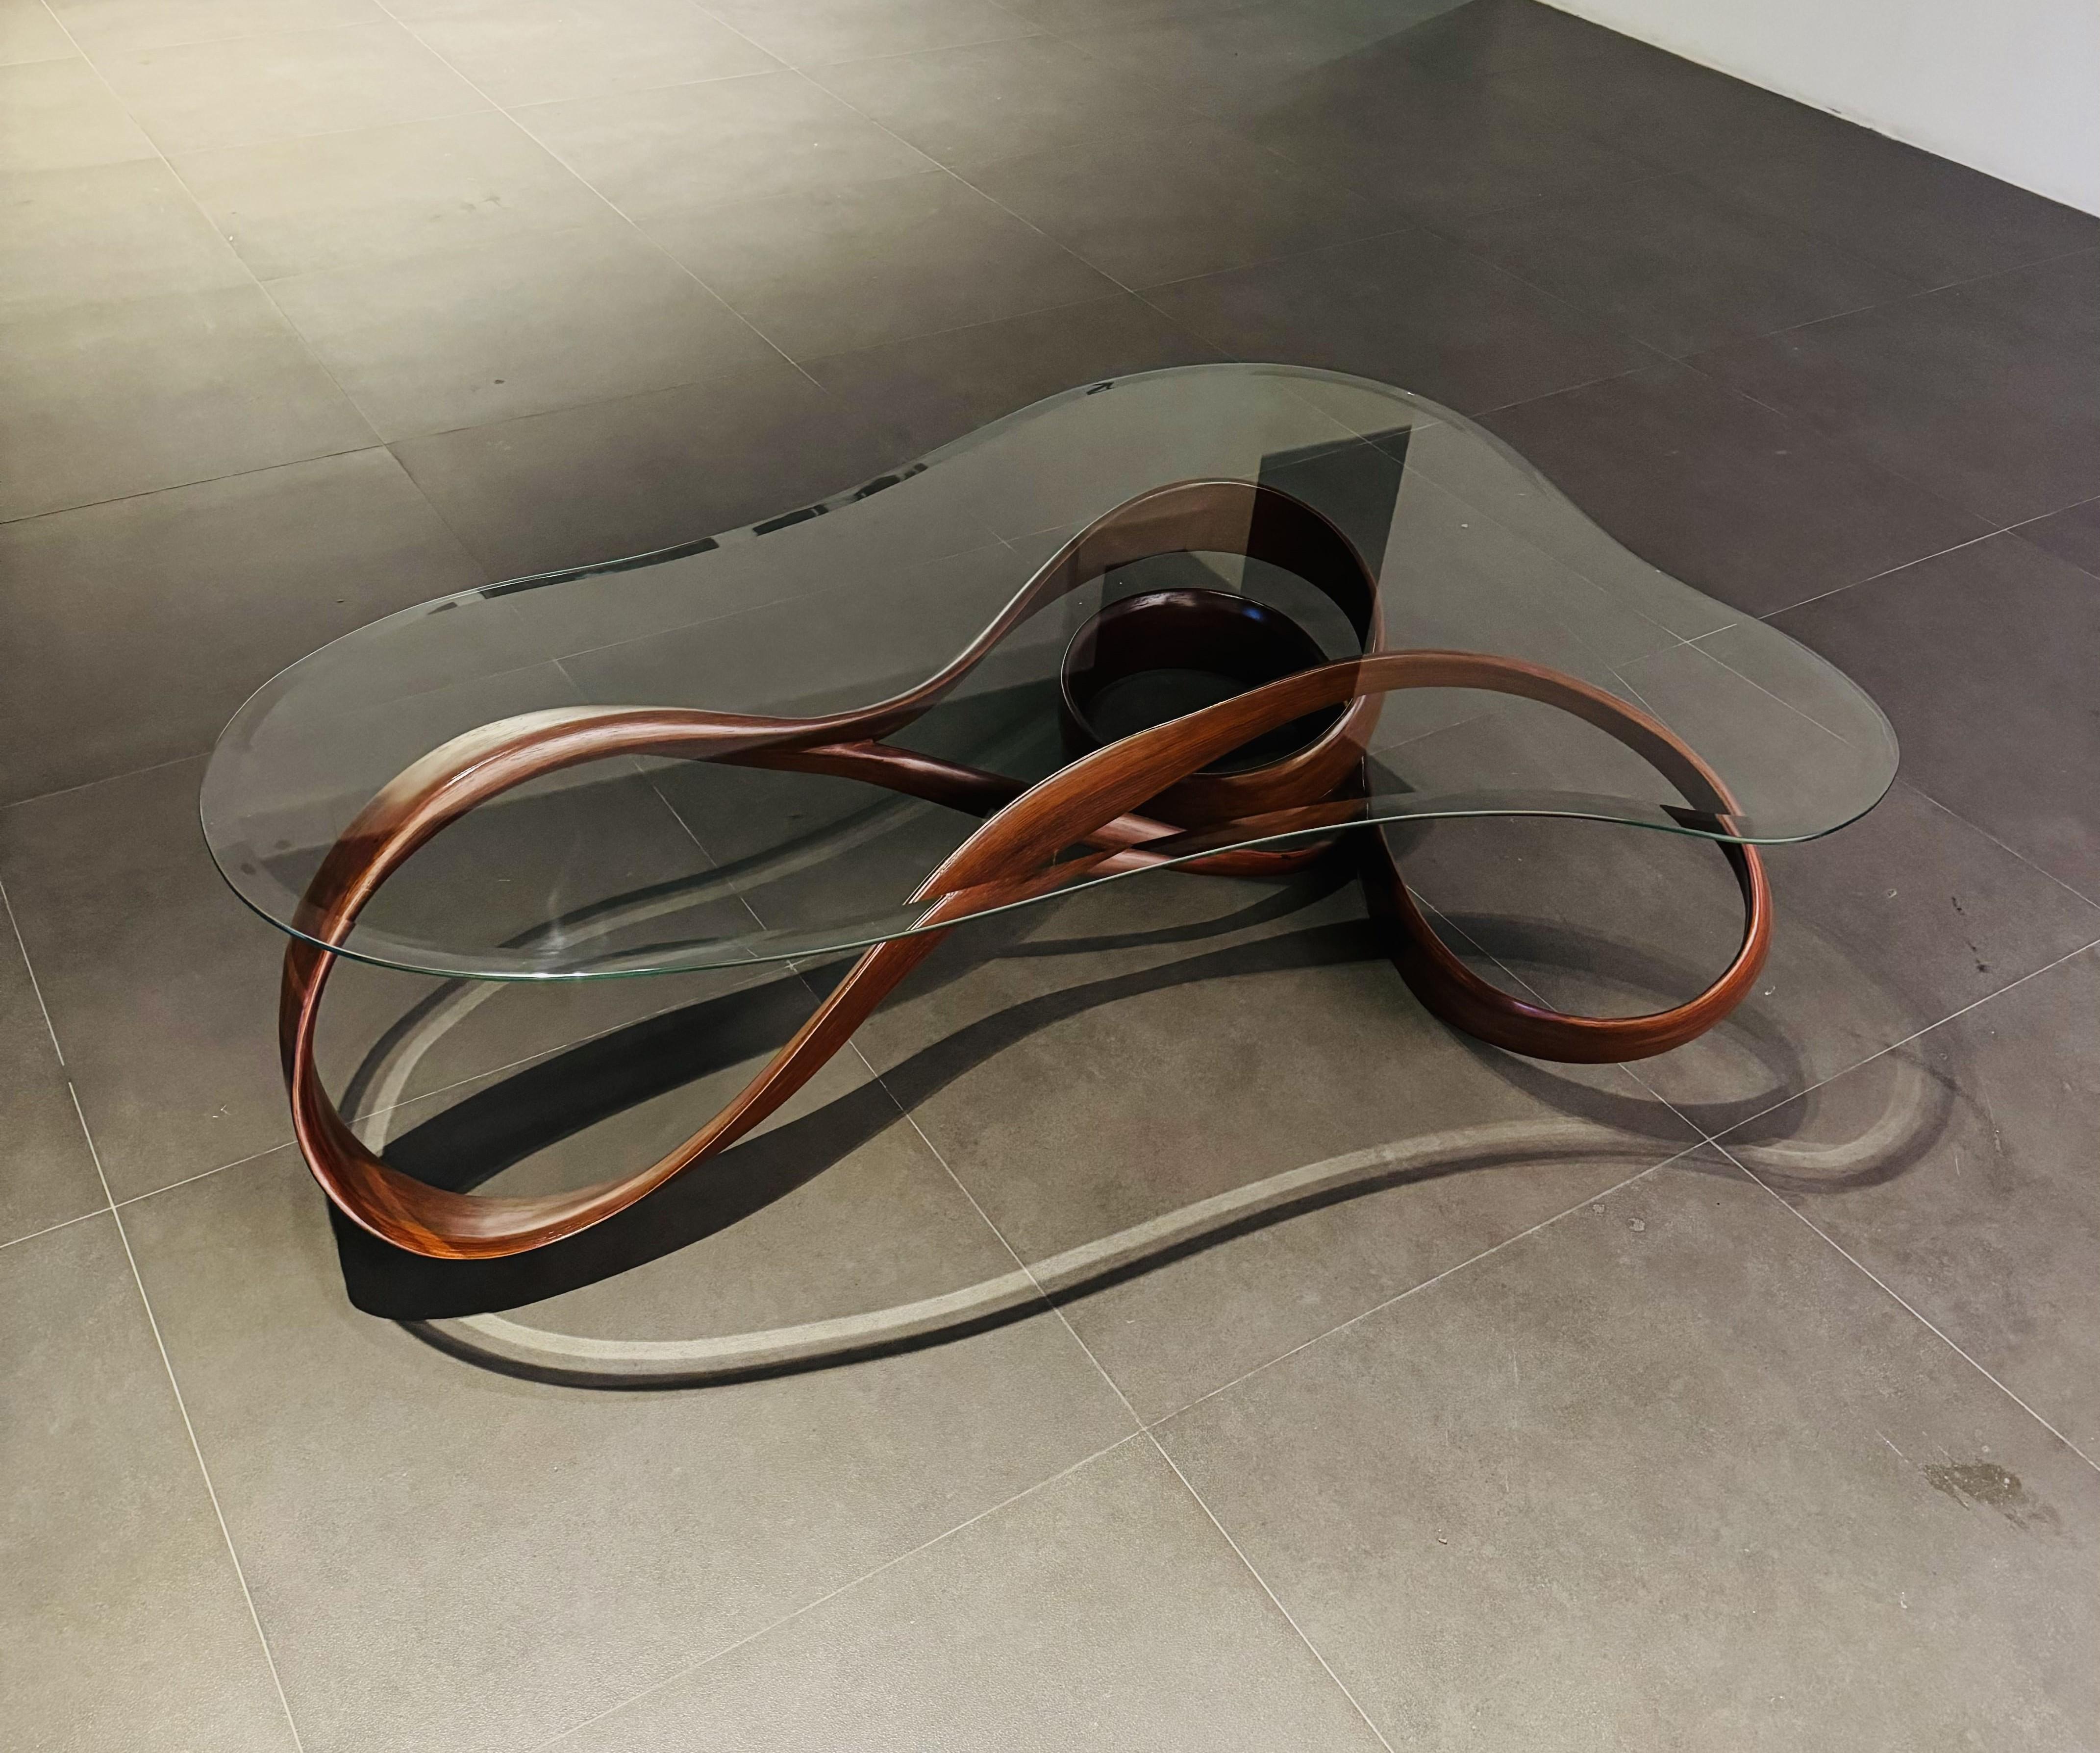 This table is the Center Table No. 1 of the Fluentum Series of works. 

The piece embodies a sculptural base that has been designed with a clean form to focus on the flow of the wood - the wood has been carved to shrink and grow in thickness as the